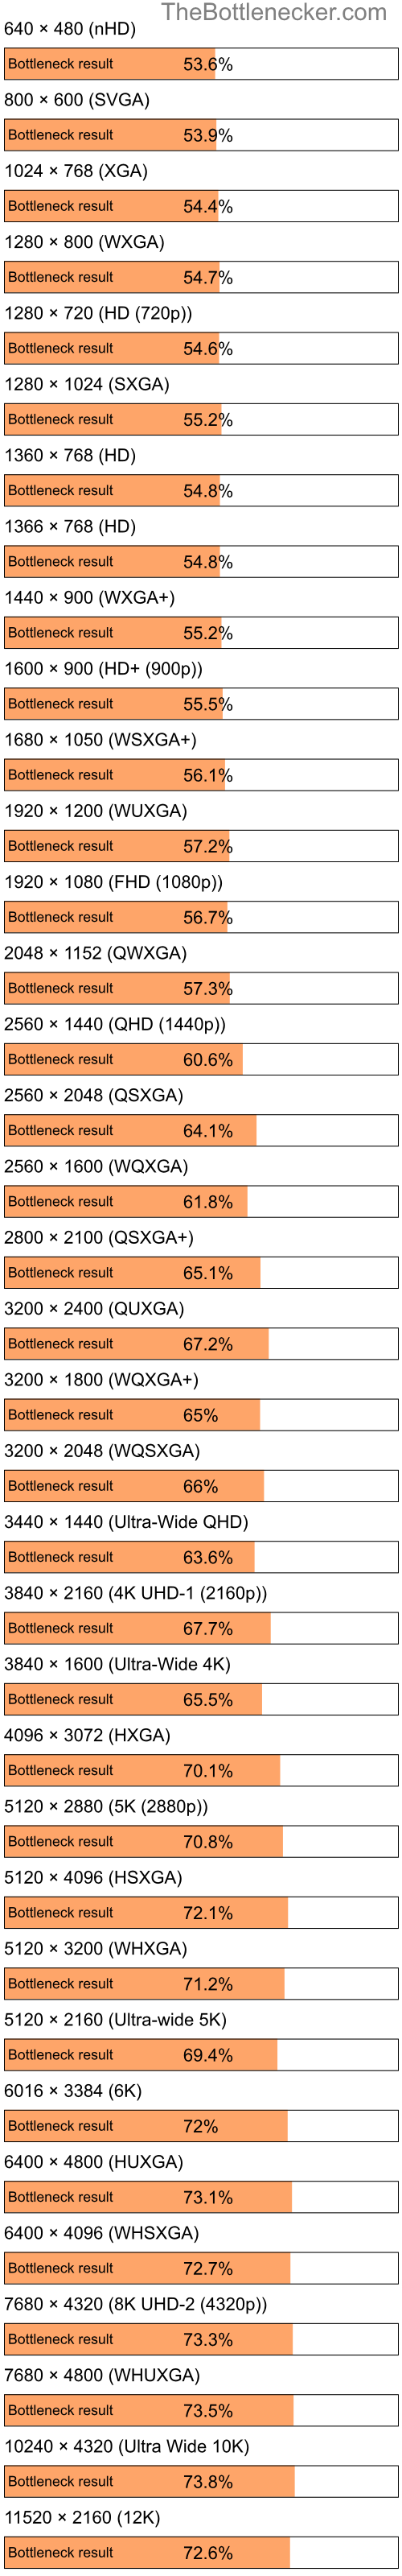 Bottleneck results by resolution for Intel Atom Z520 and NVIDIA Quadro NVS 295 in Processor Intense Tasks